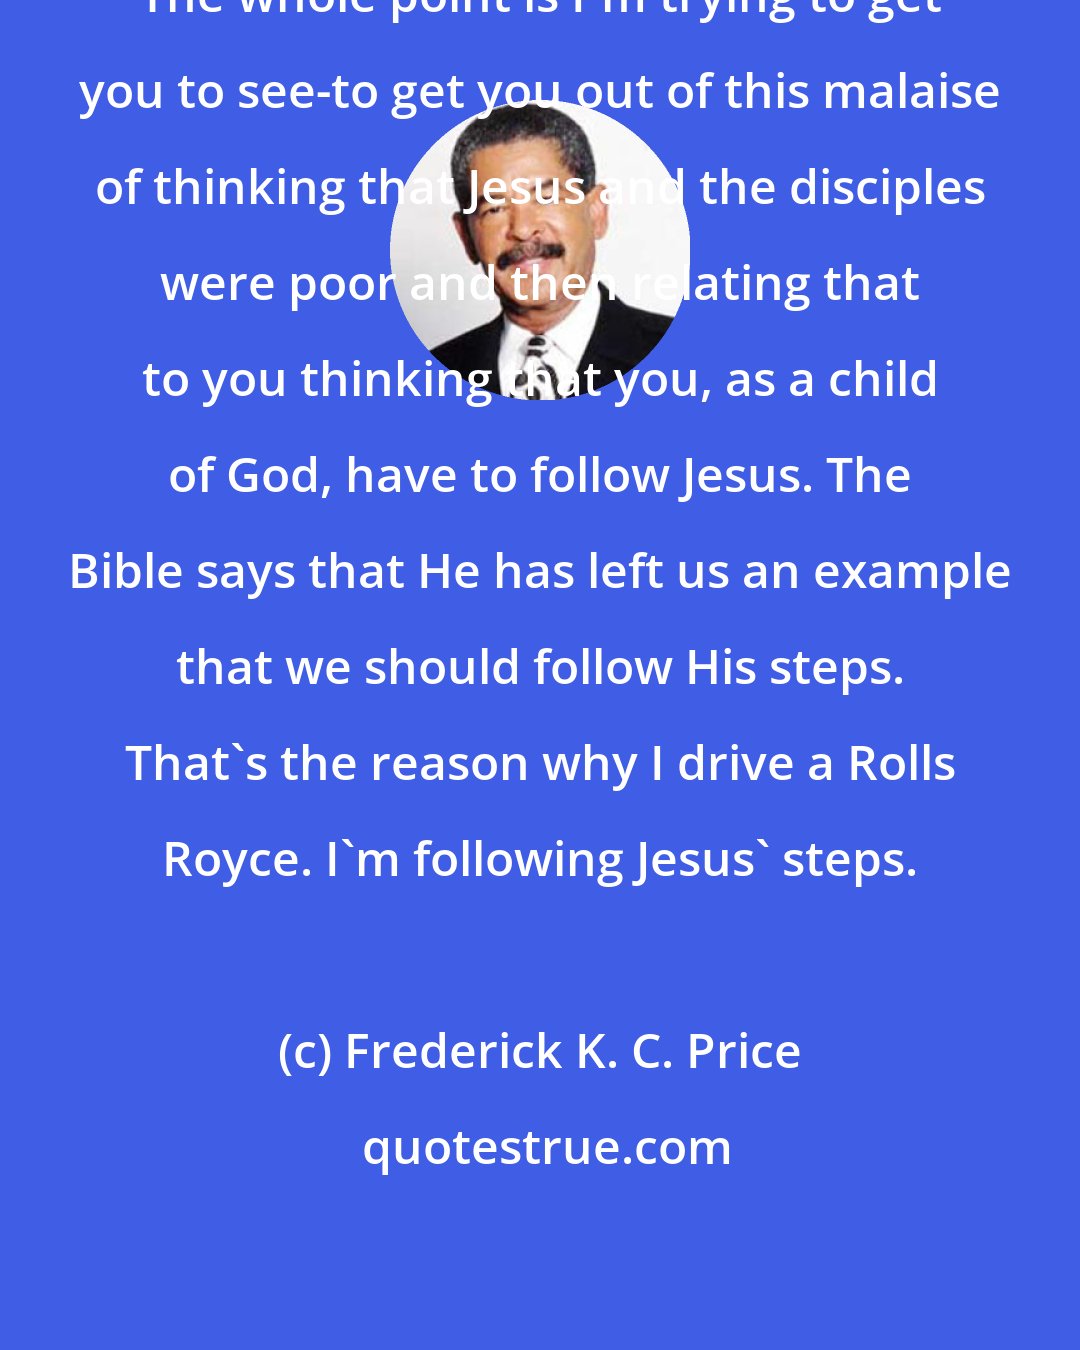 Frederick K. C. Price: The whole point is I'm trying to get you to see-to get you out of this malaise of thinking that Jesus and the disciples were poor and then relating that to you thinking that you, as a child of God, have to follow Jesus. The Bible says that He has left us an example that we should follow His steps. That's the reason why I drive a Rolls Royce. I'm following Jesus' steps.